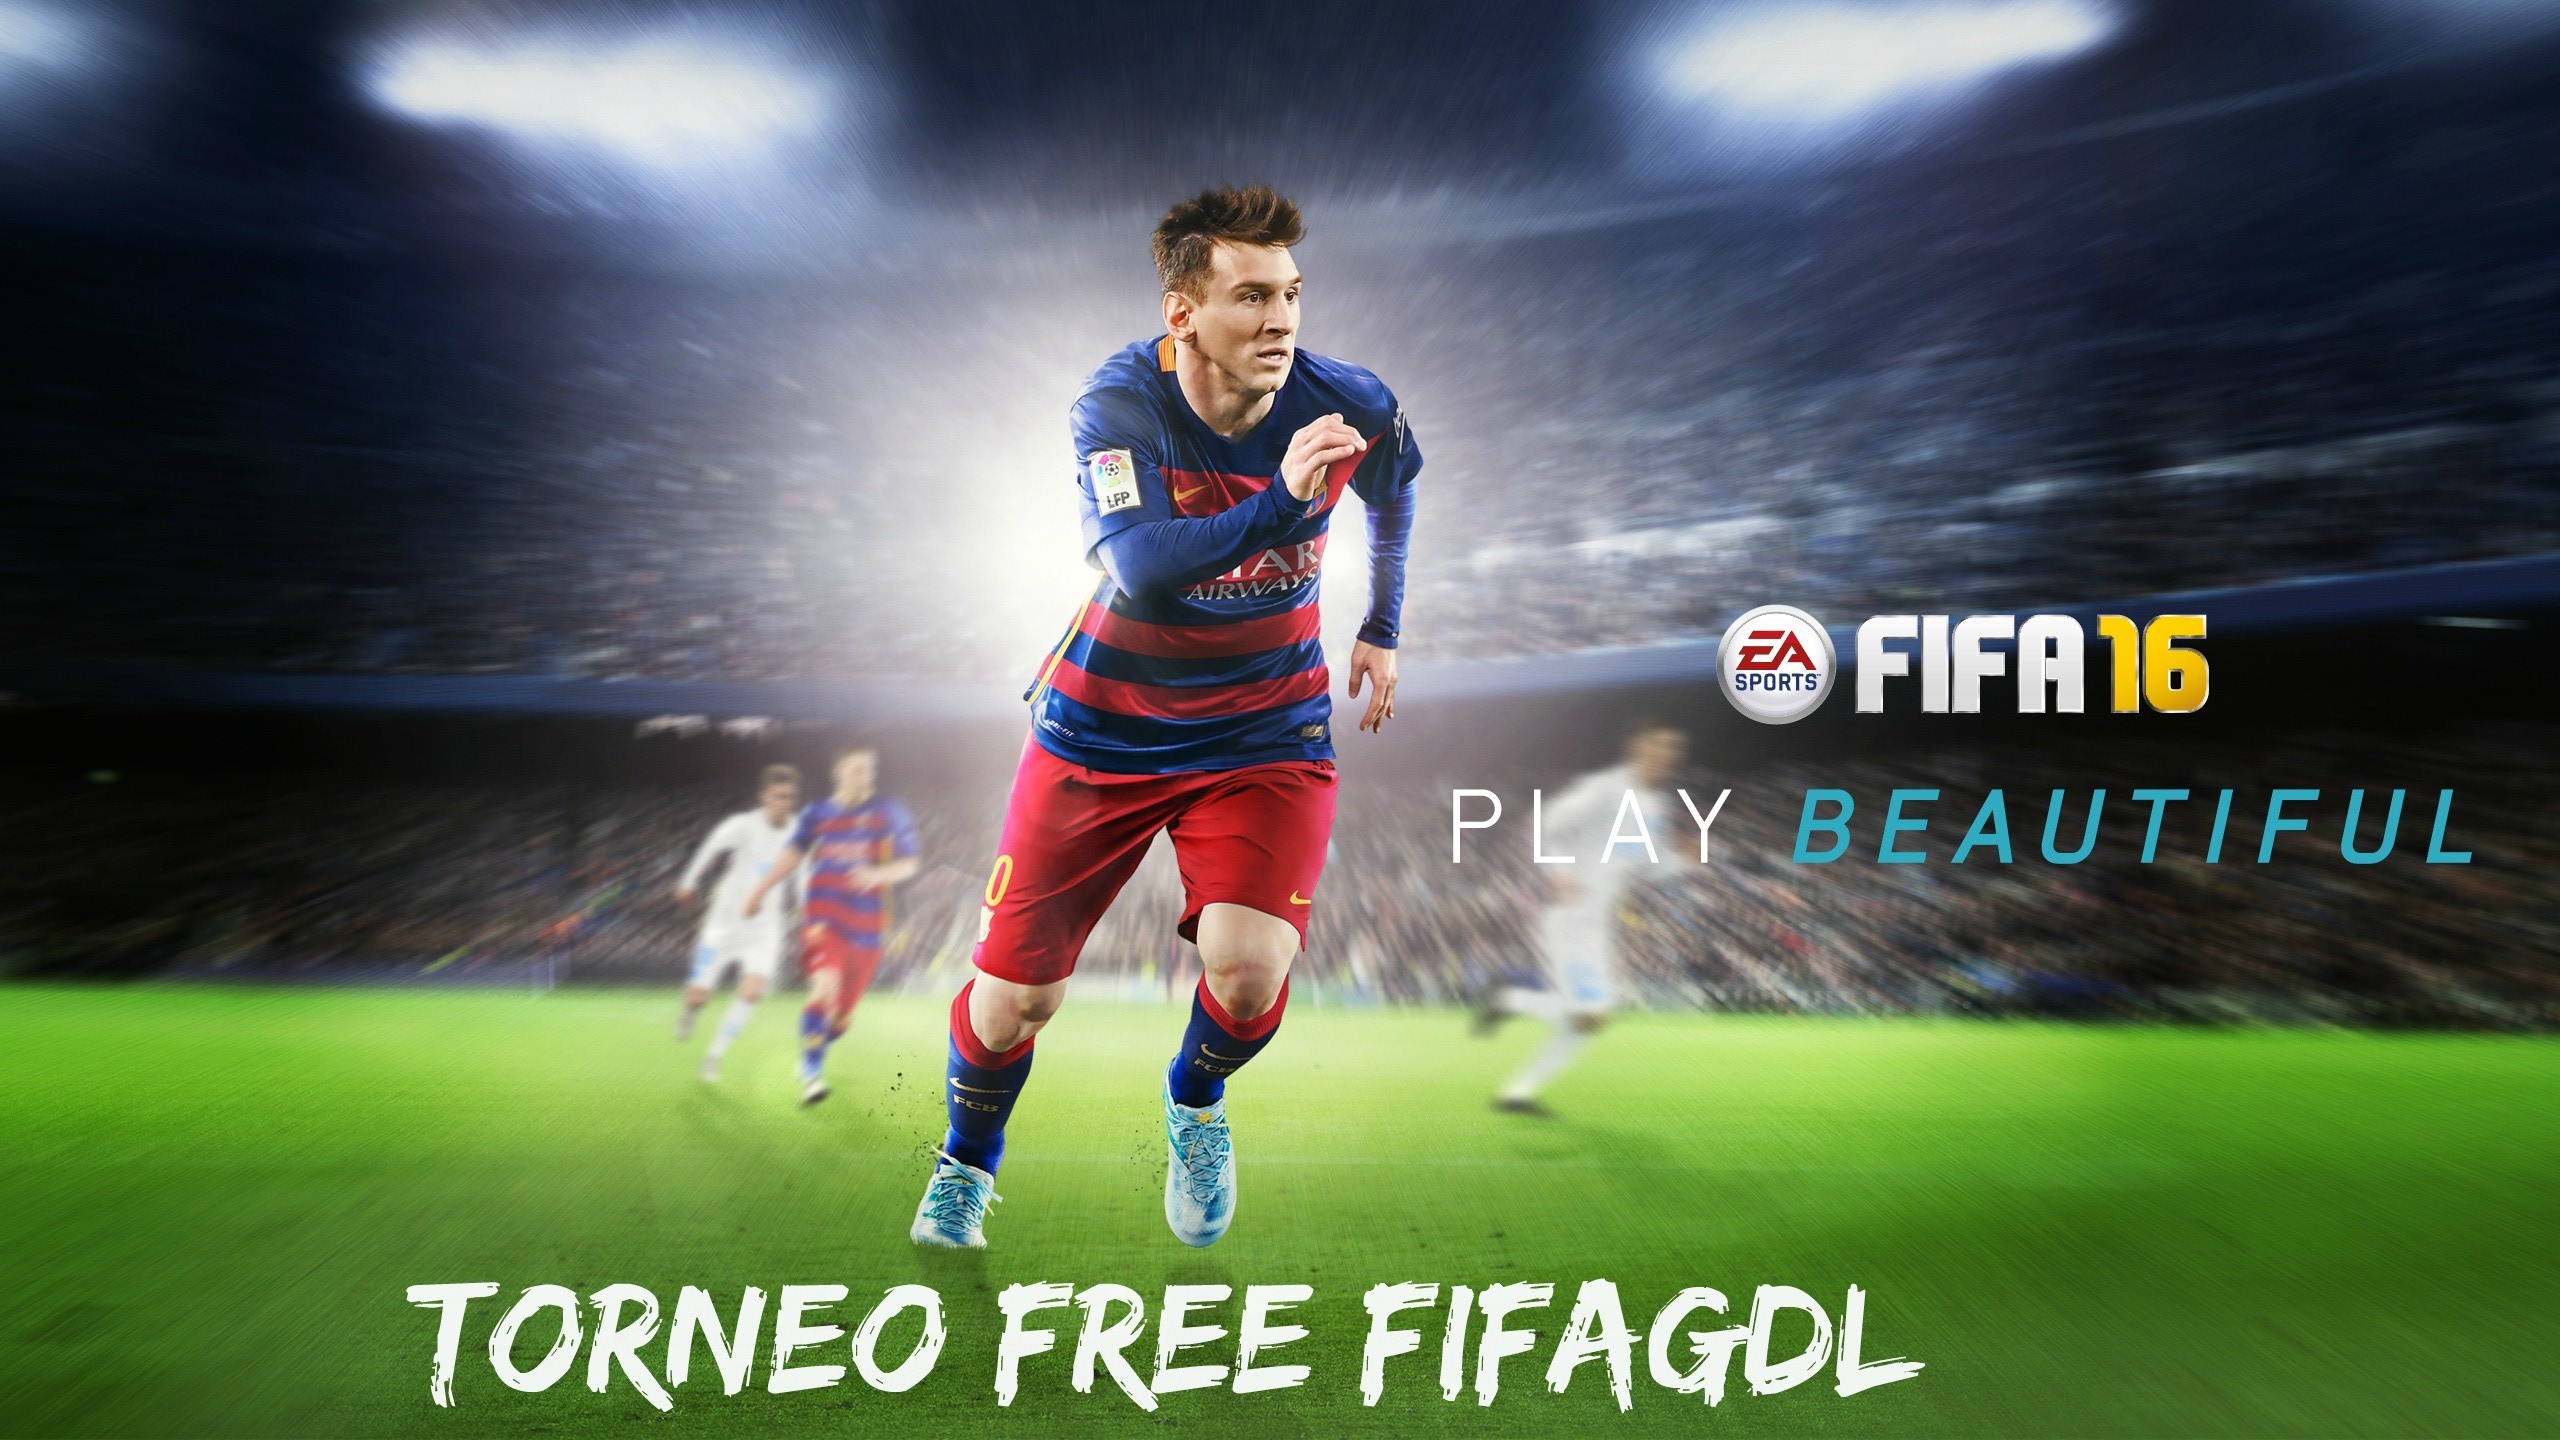 Torneo FREE FIFAGDL